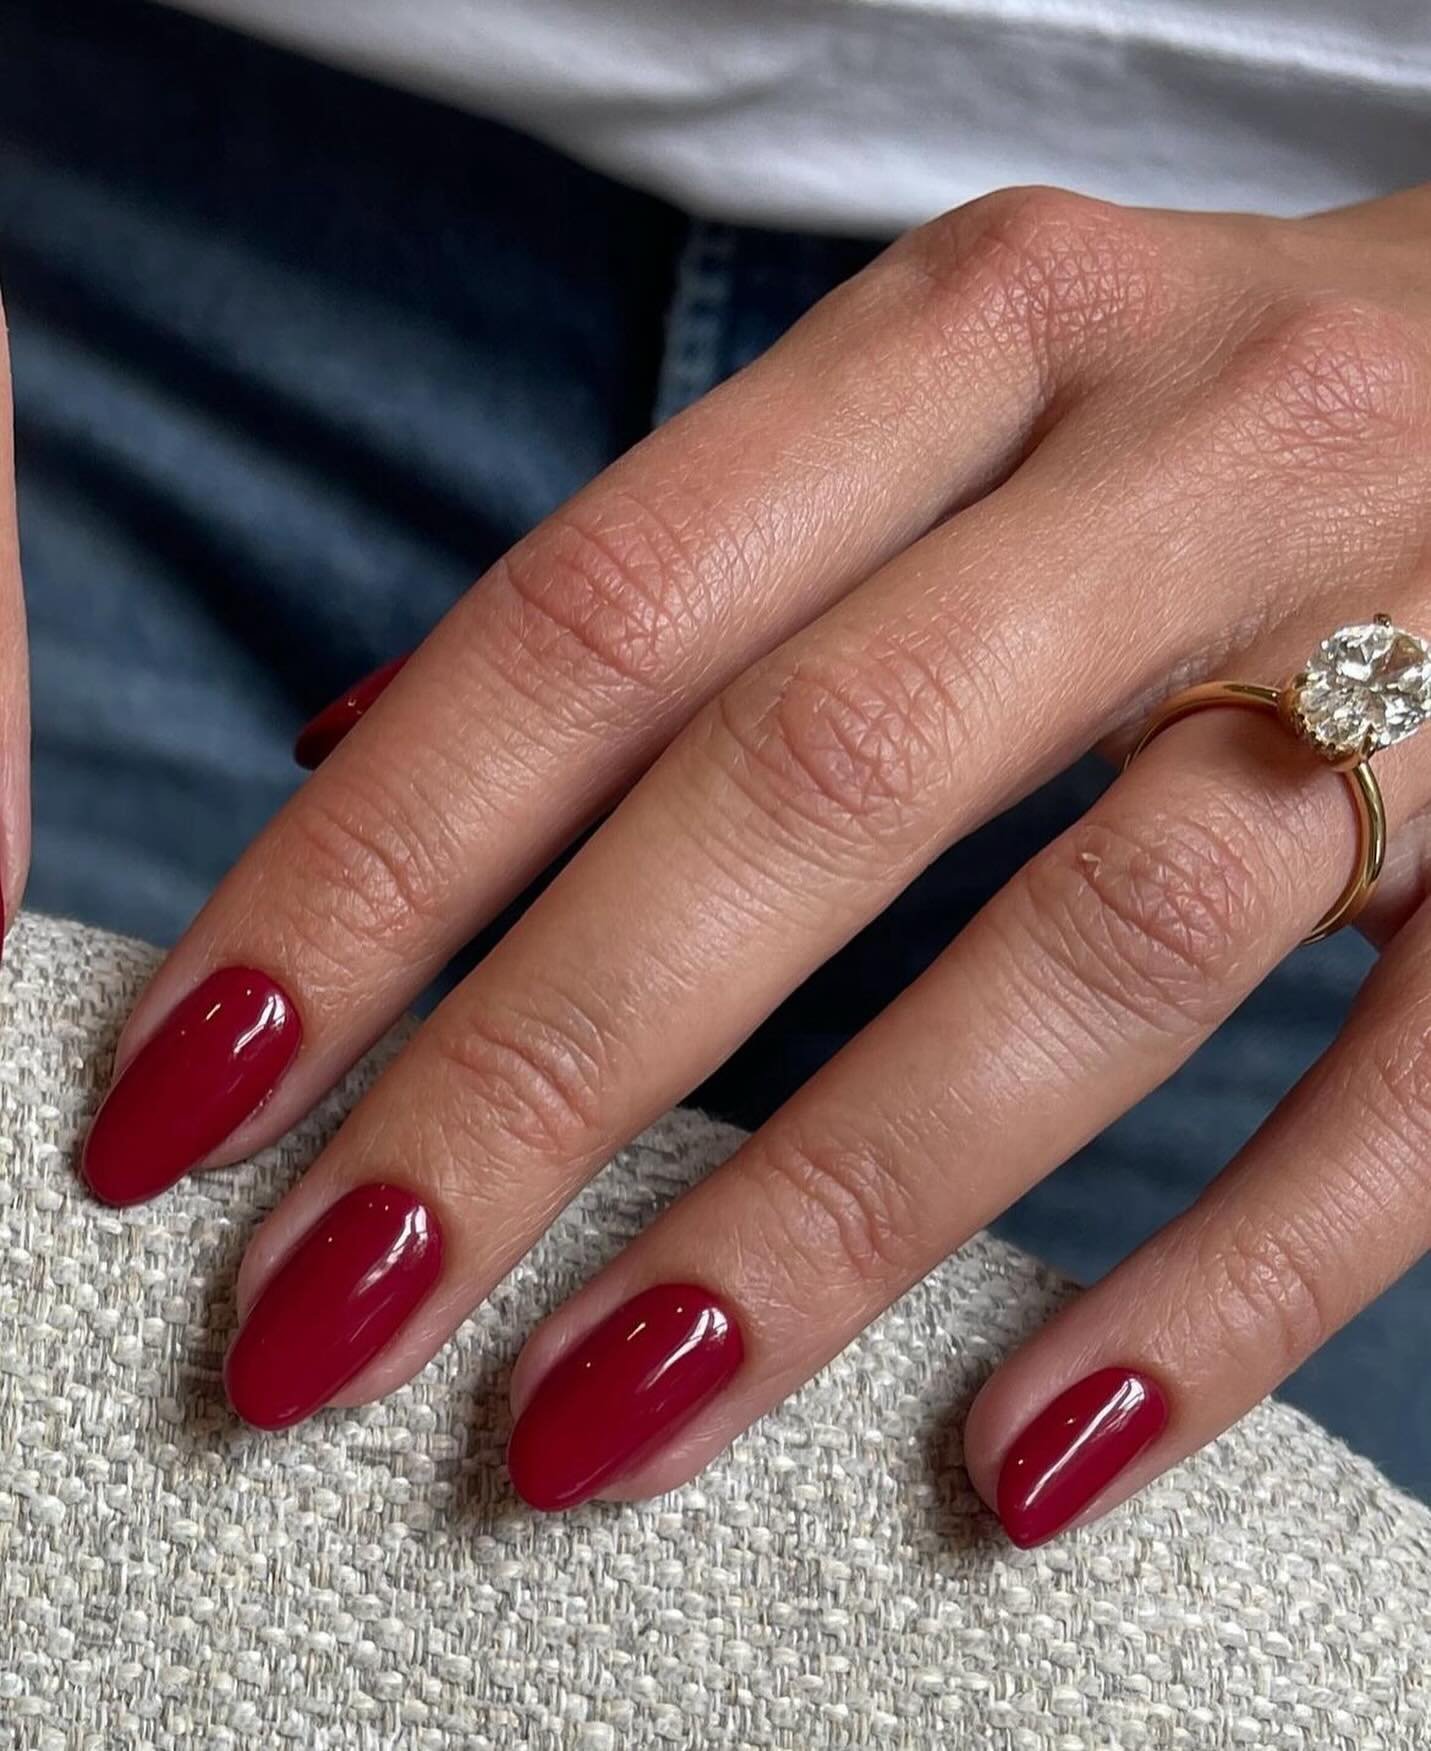 A beautiful cherry red by celebrity nail technician and #lucieexpert Laura. Book now via the @lucie.app for those upcoming weekend plans.

| LONDON |

#LucieAtHome #LucieNails